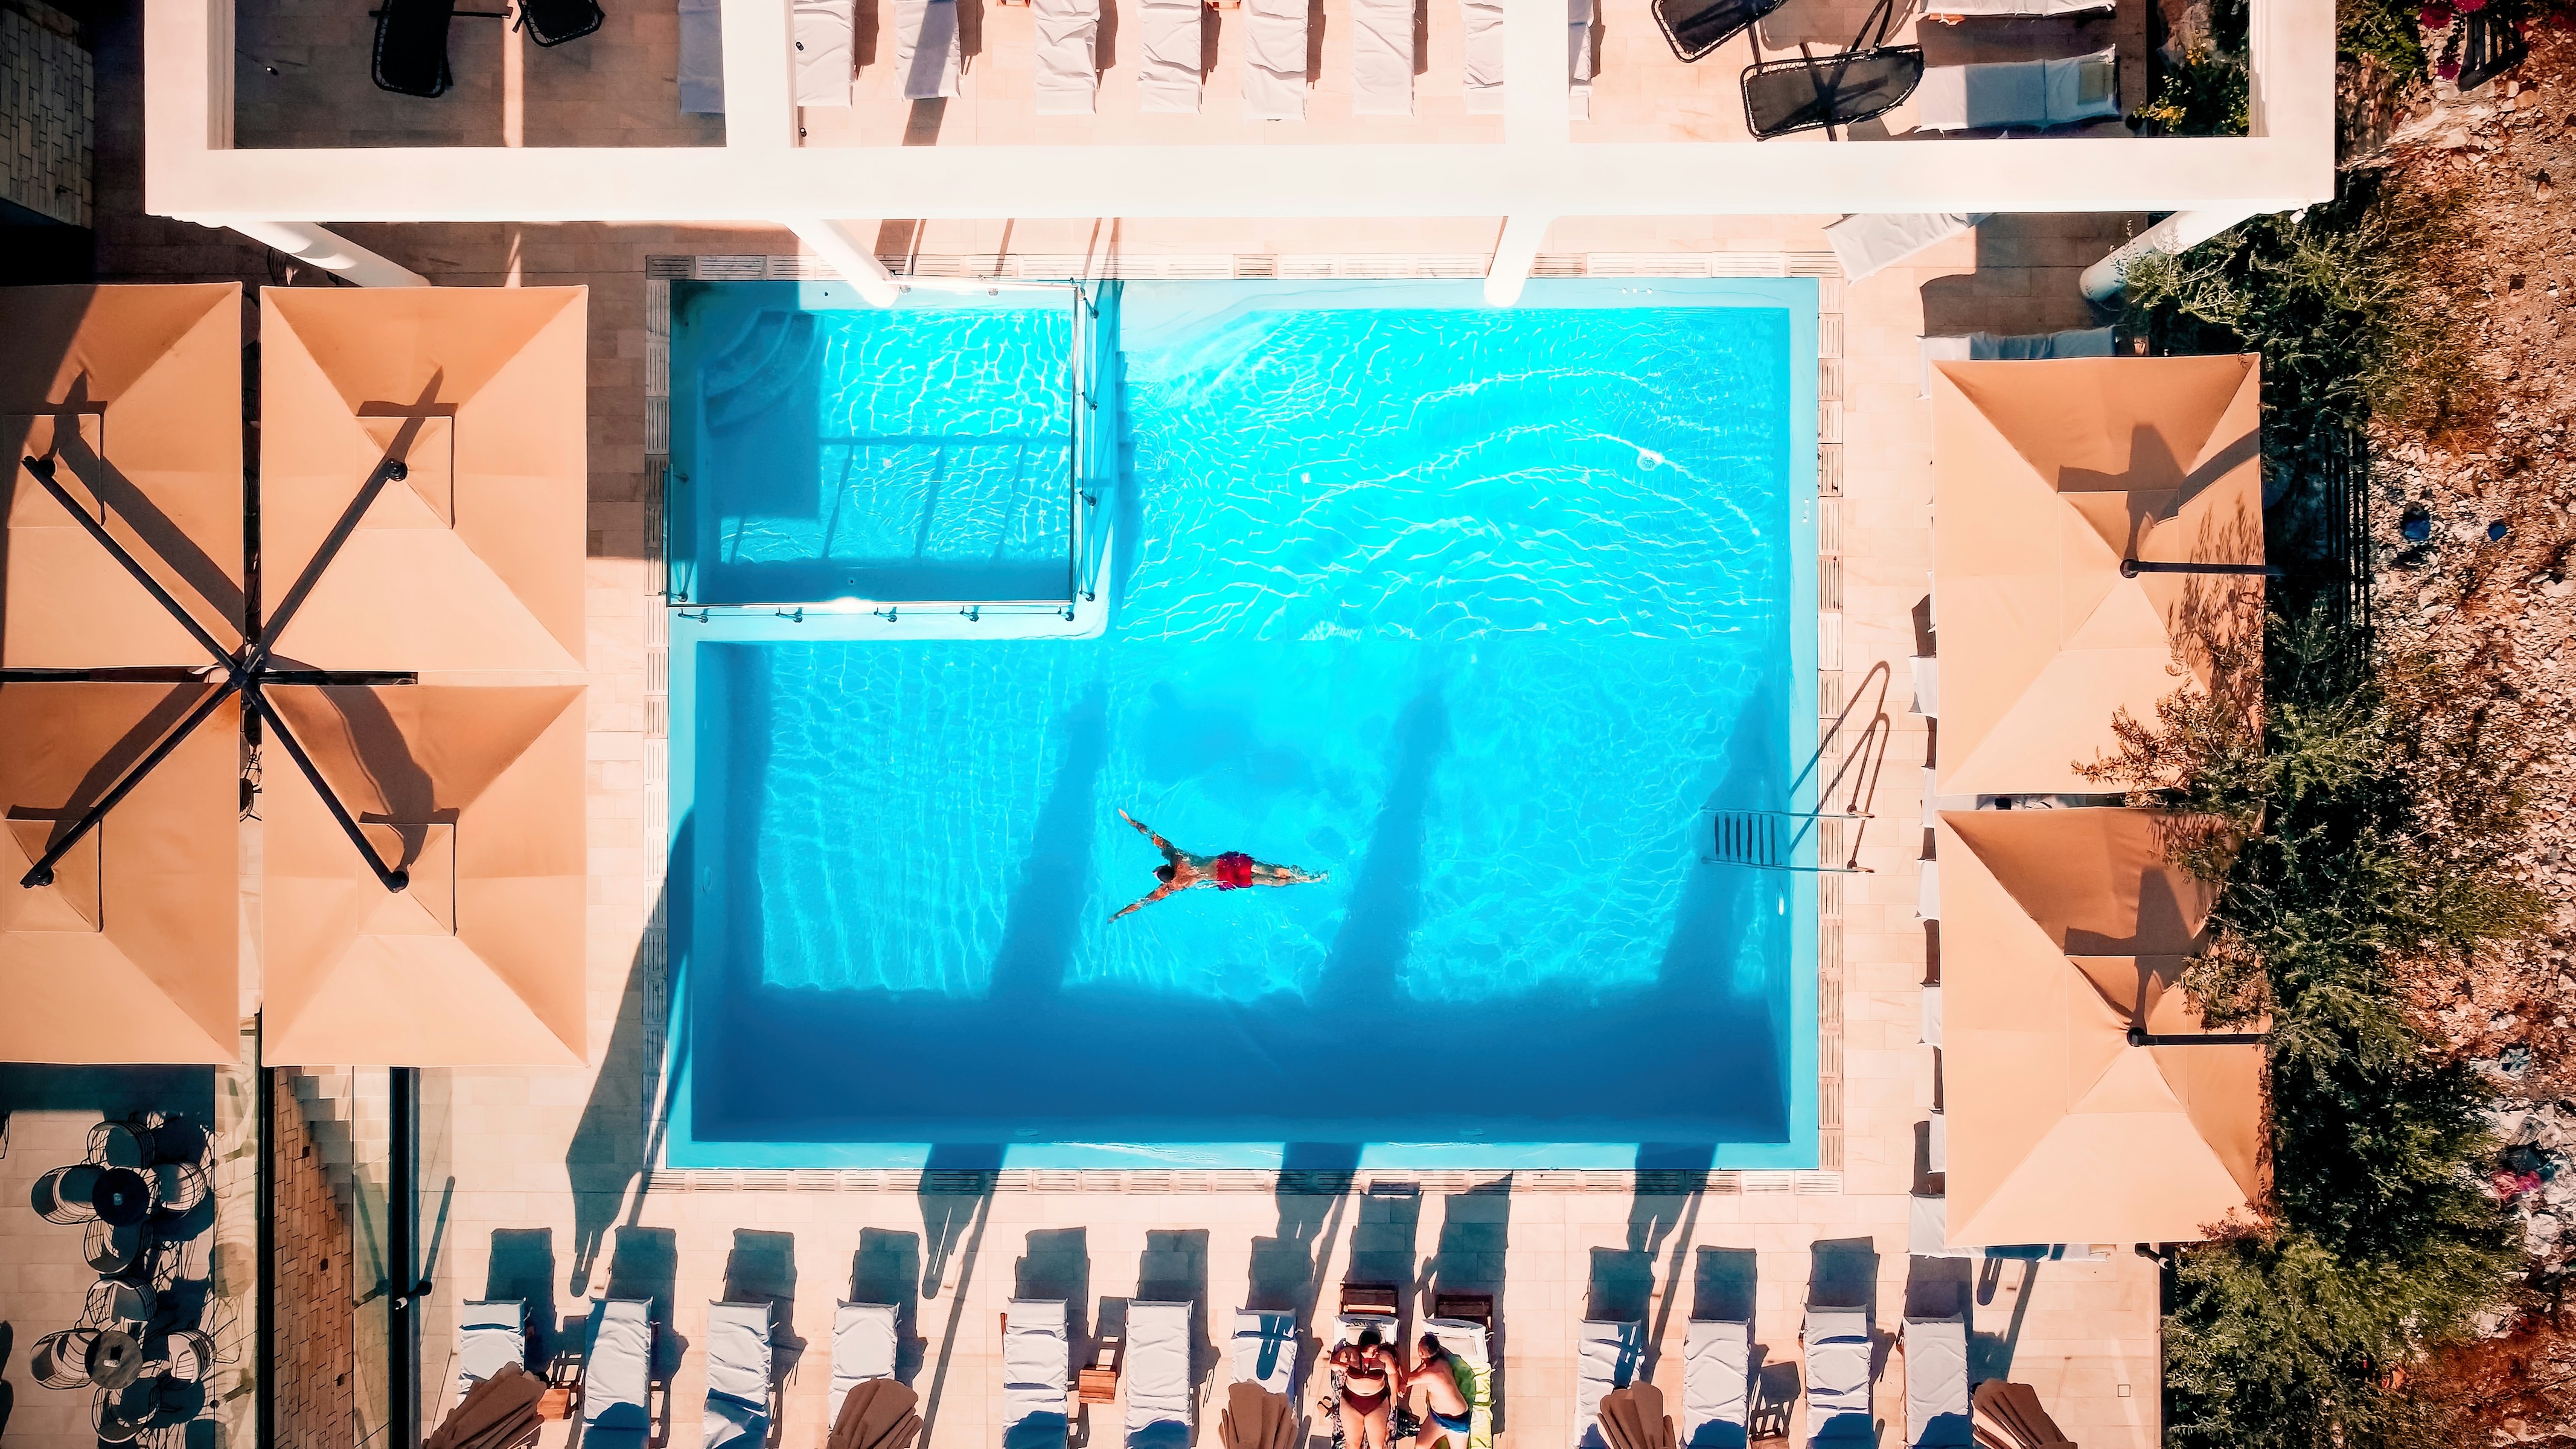 A view from above of a hotel with a pool and a man swimming